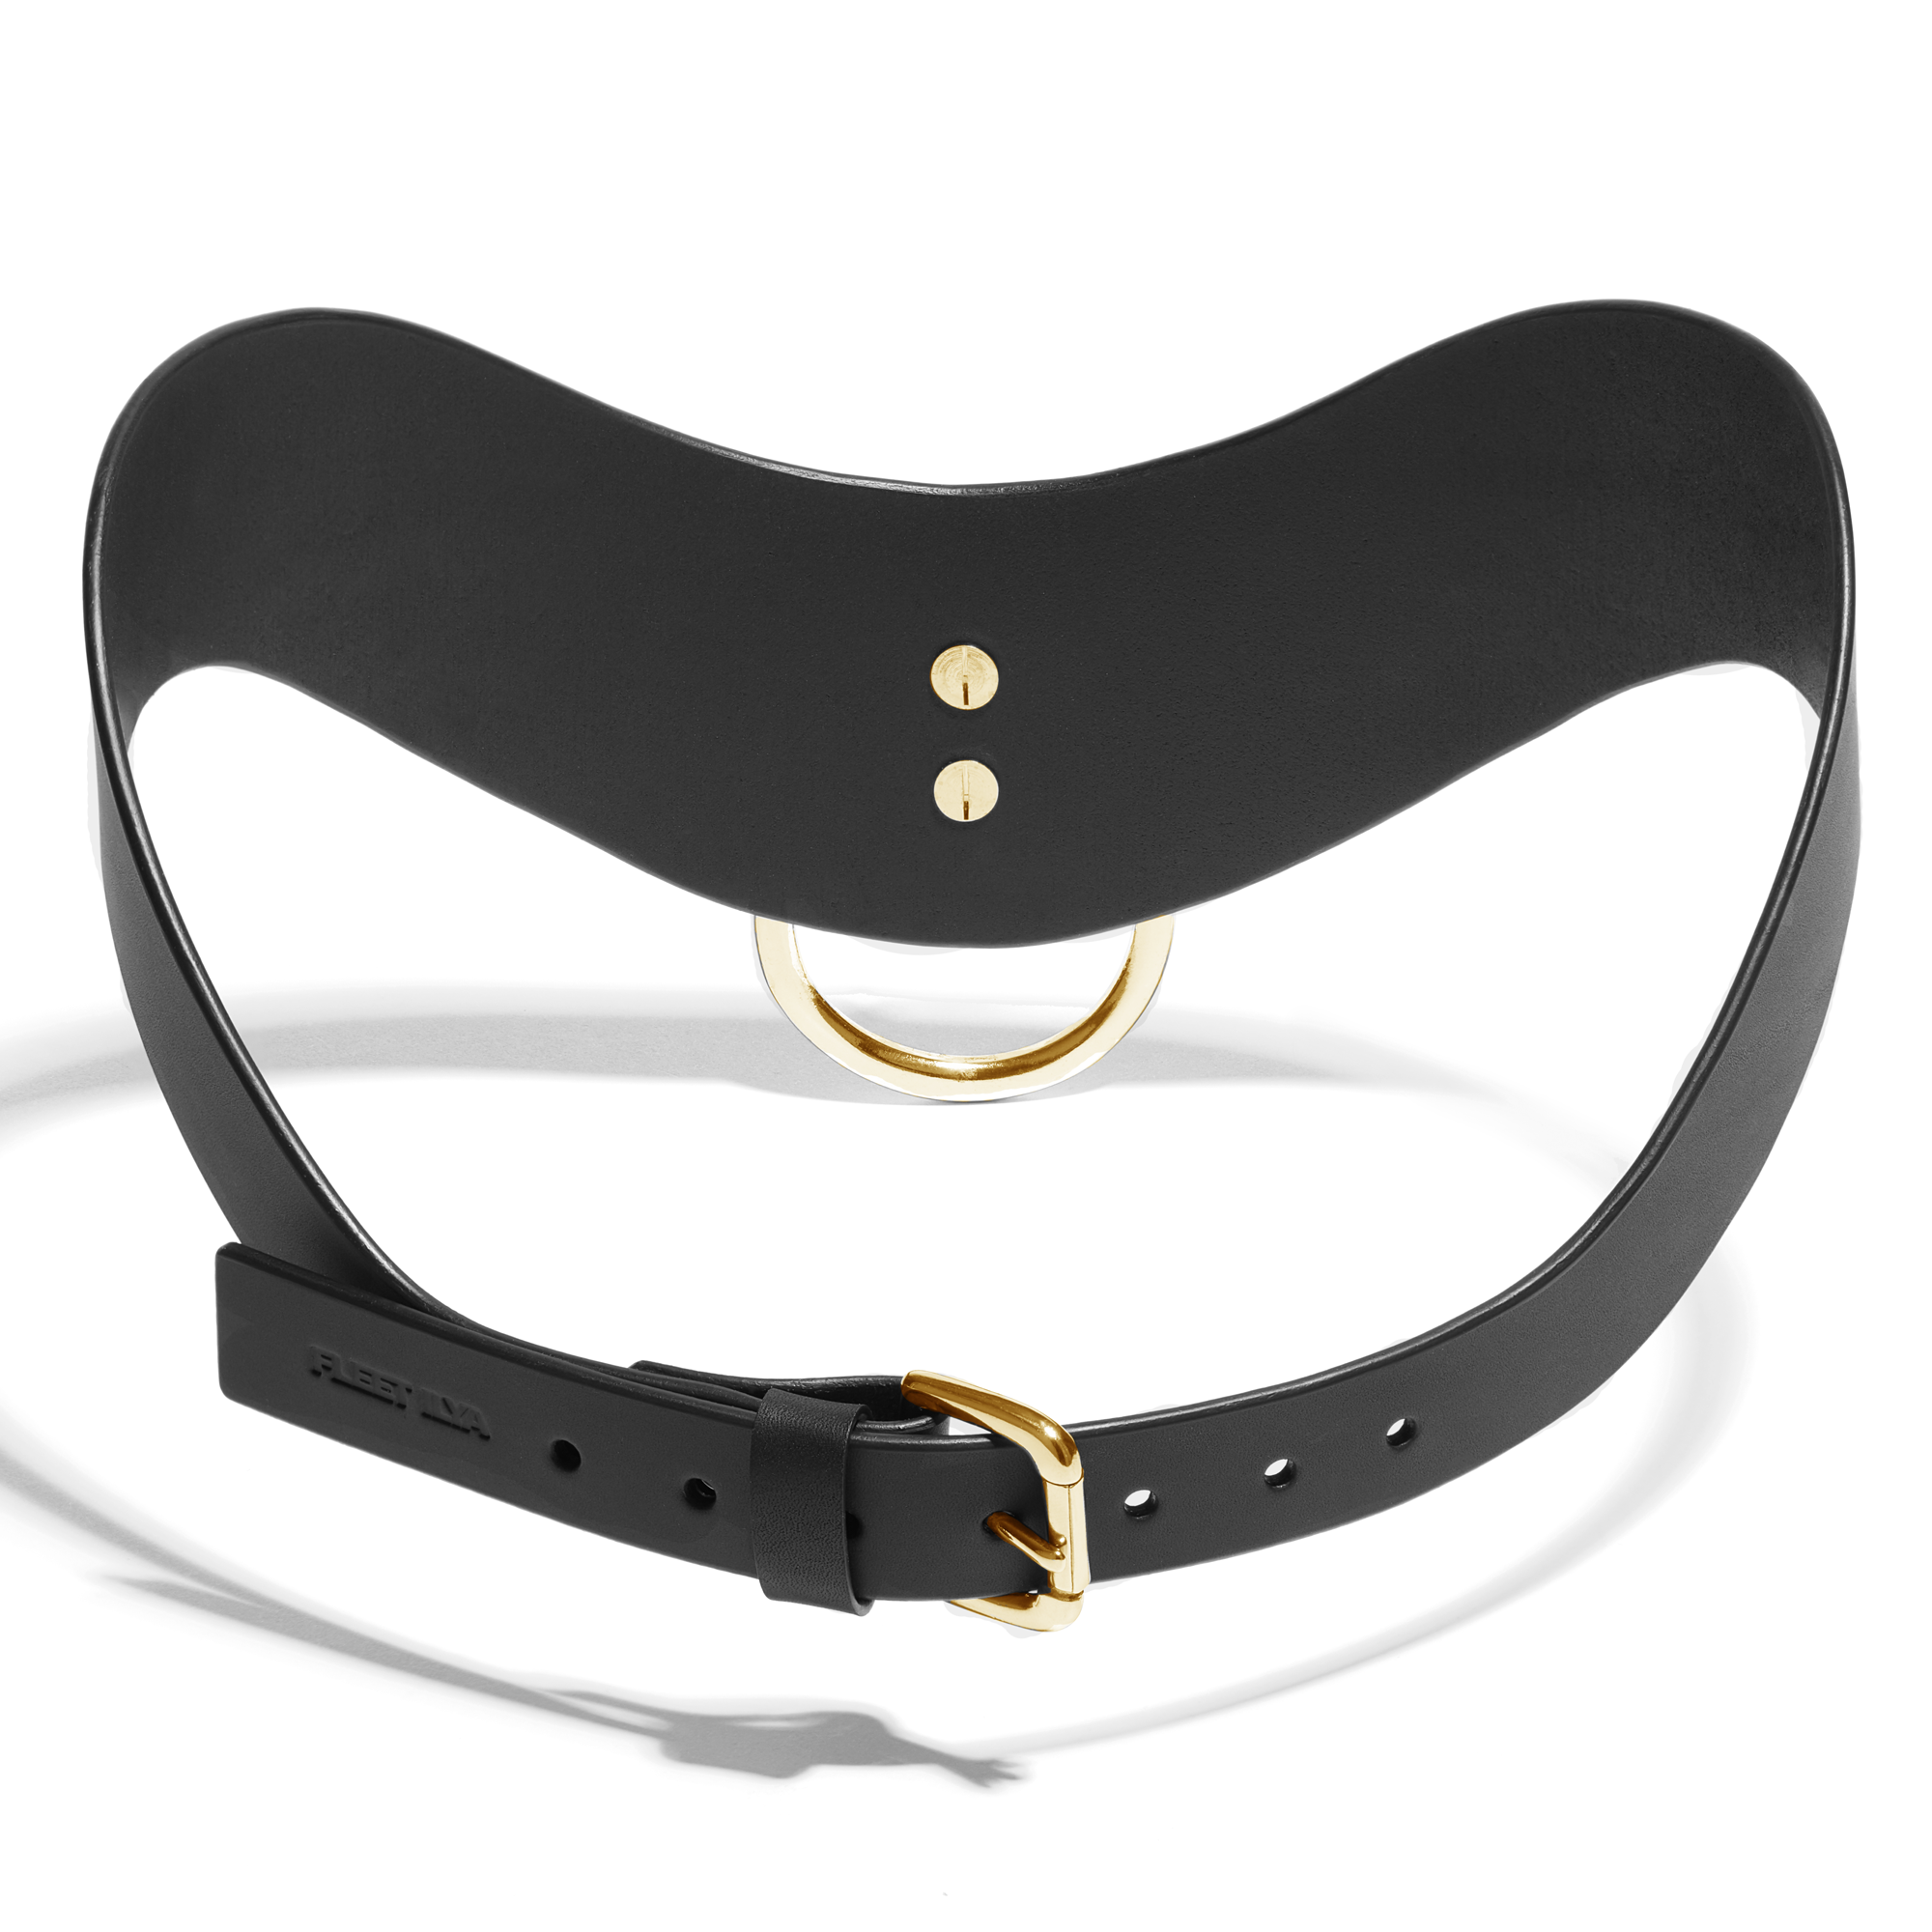 Fleet Ilya O-ring curved belt in black leather with large brass o ring on front